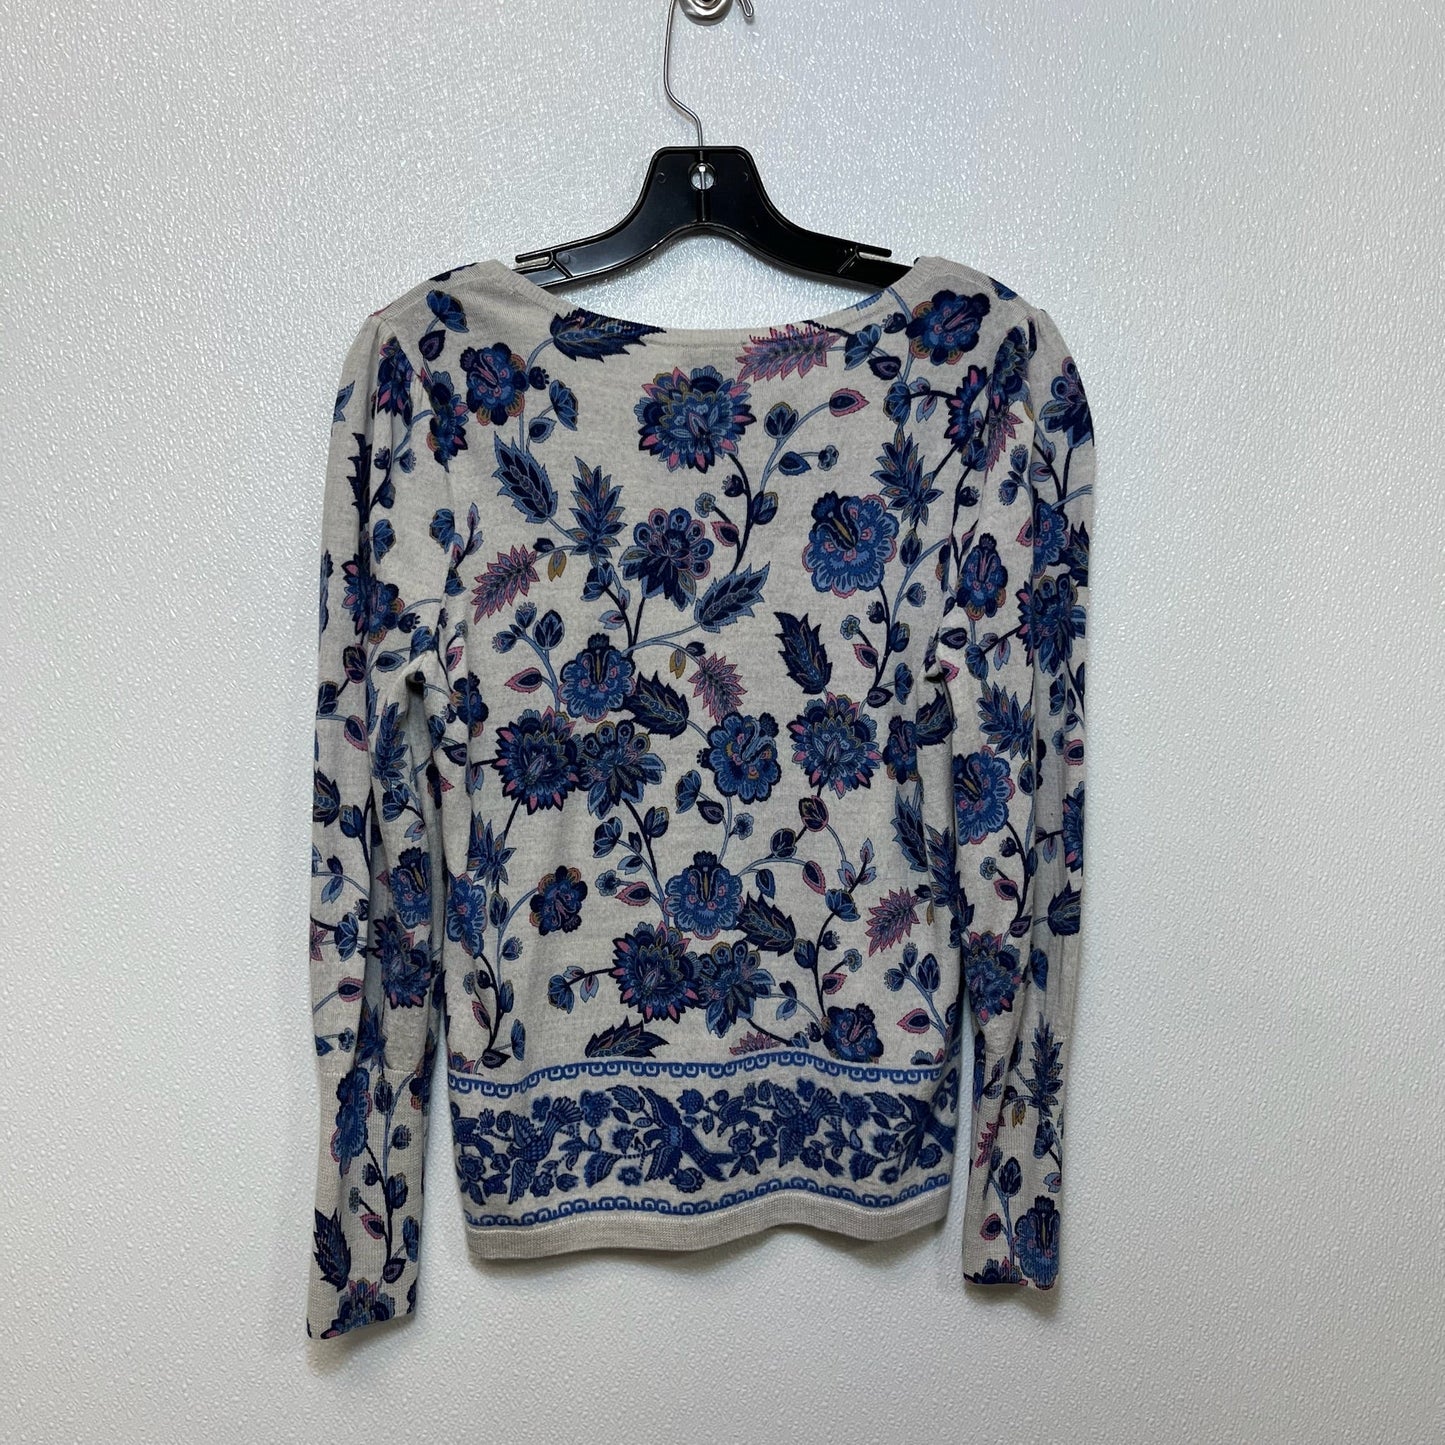 Sweater By Talbots O  Size: M